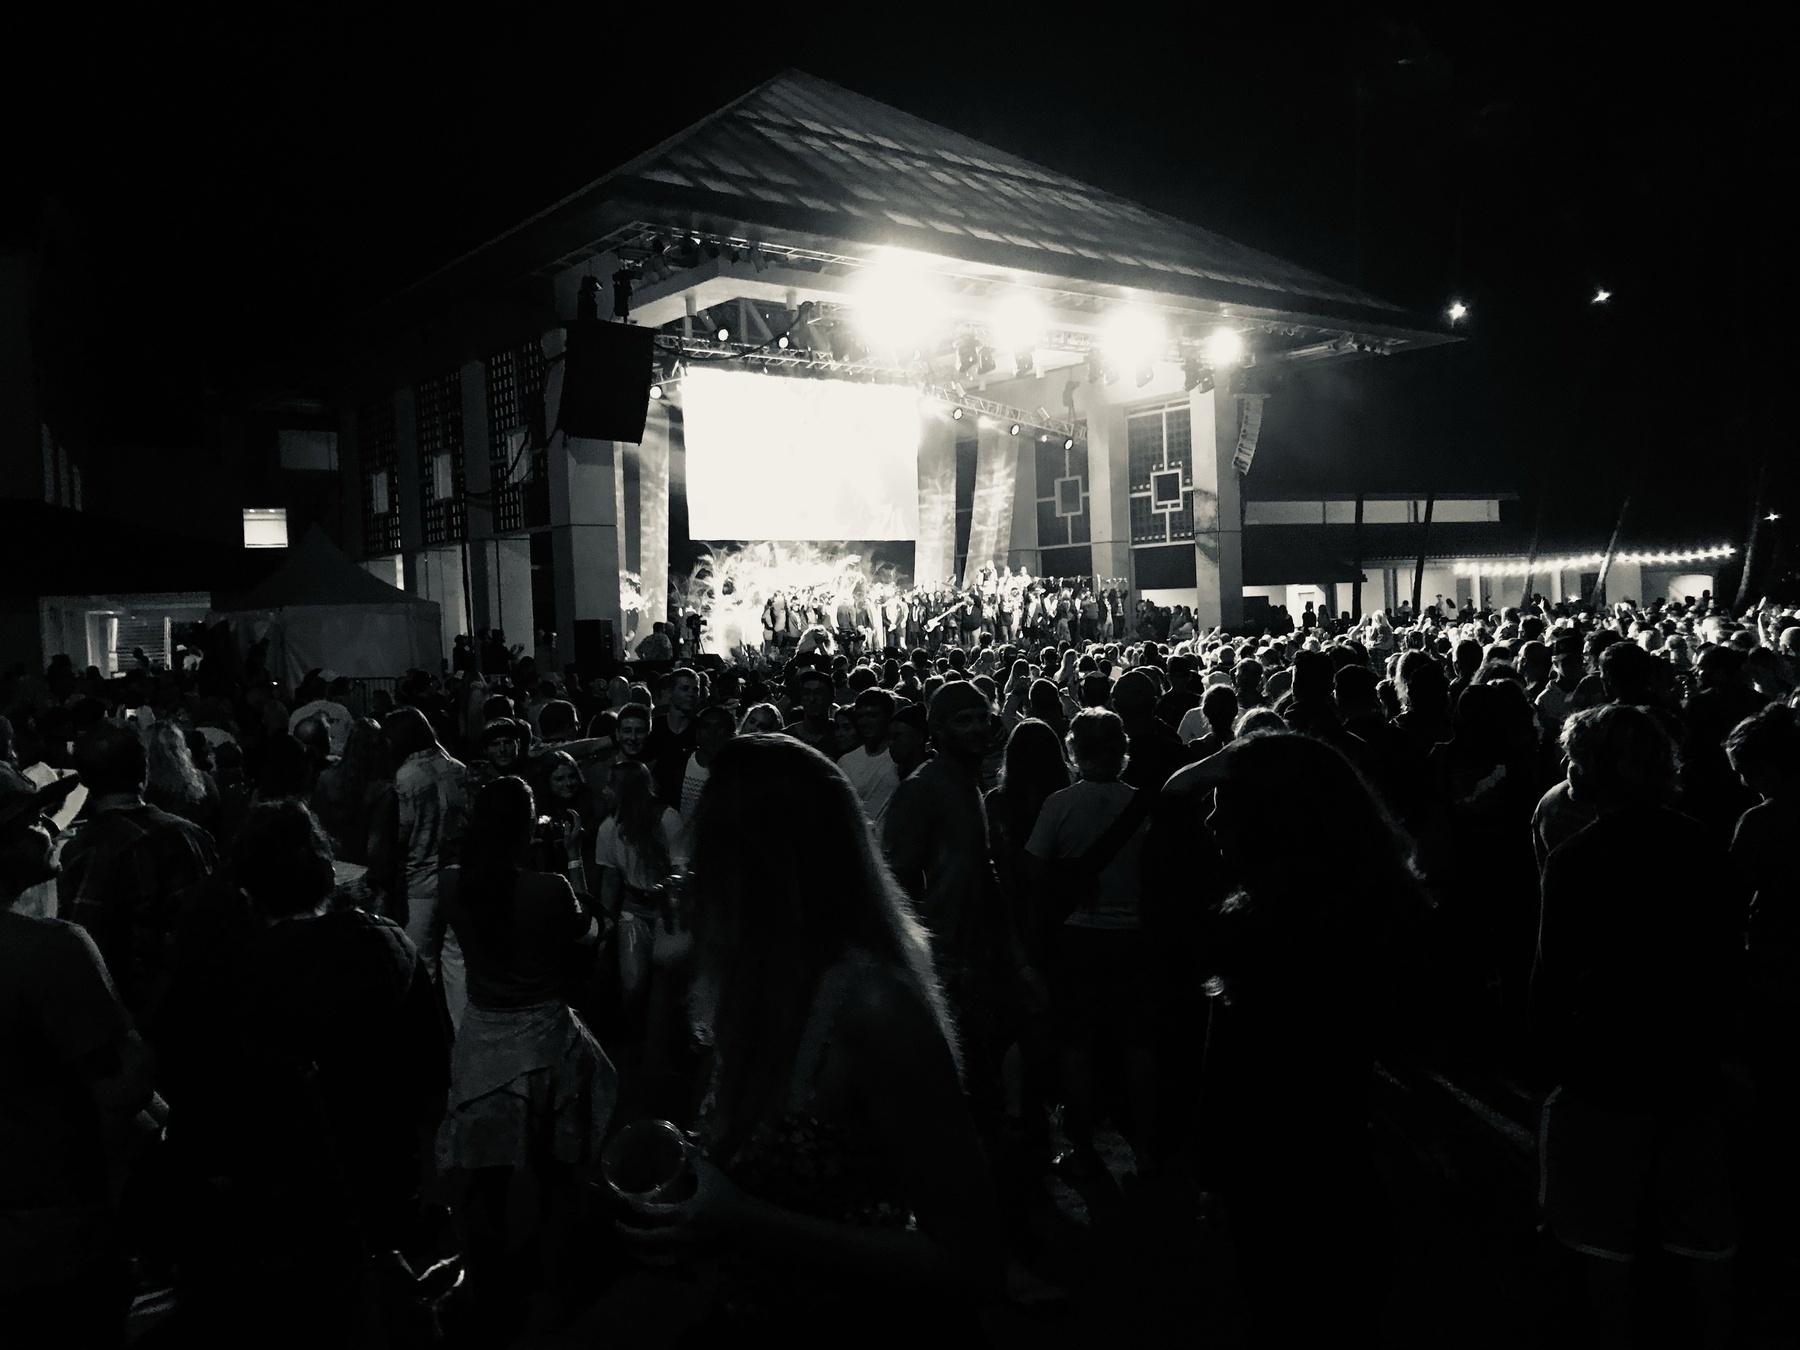 A crowd attending an outdoor concert at night